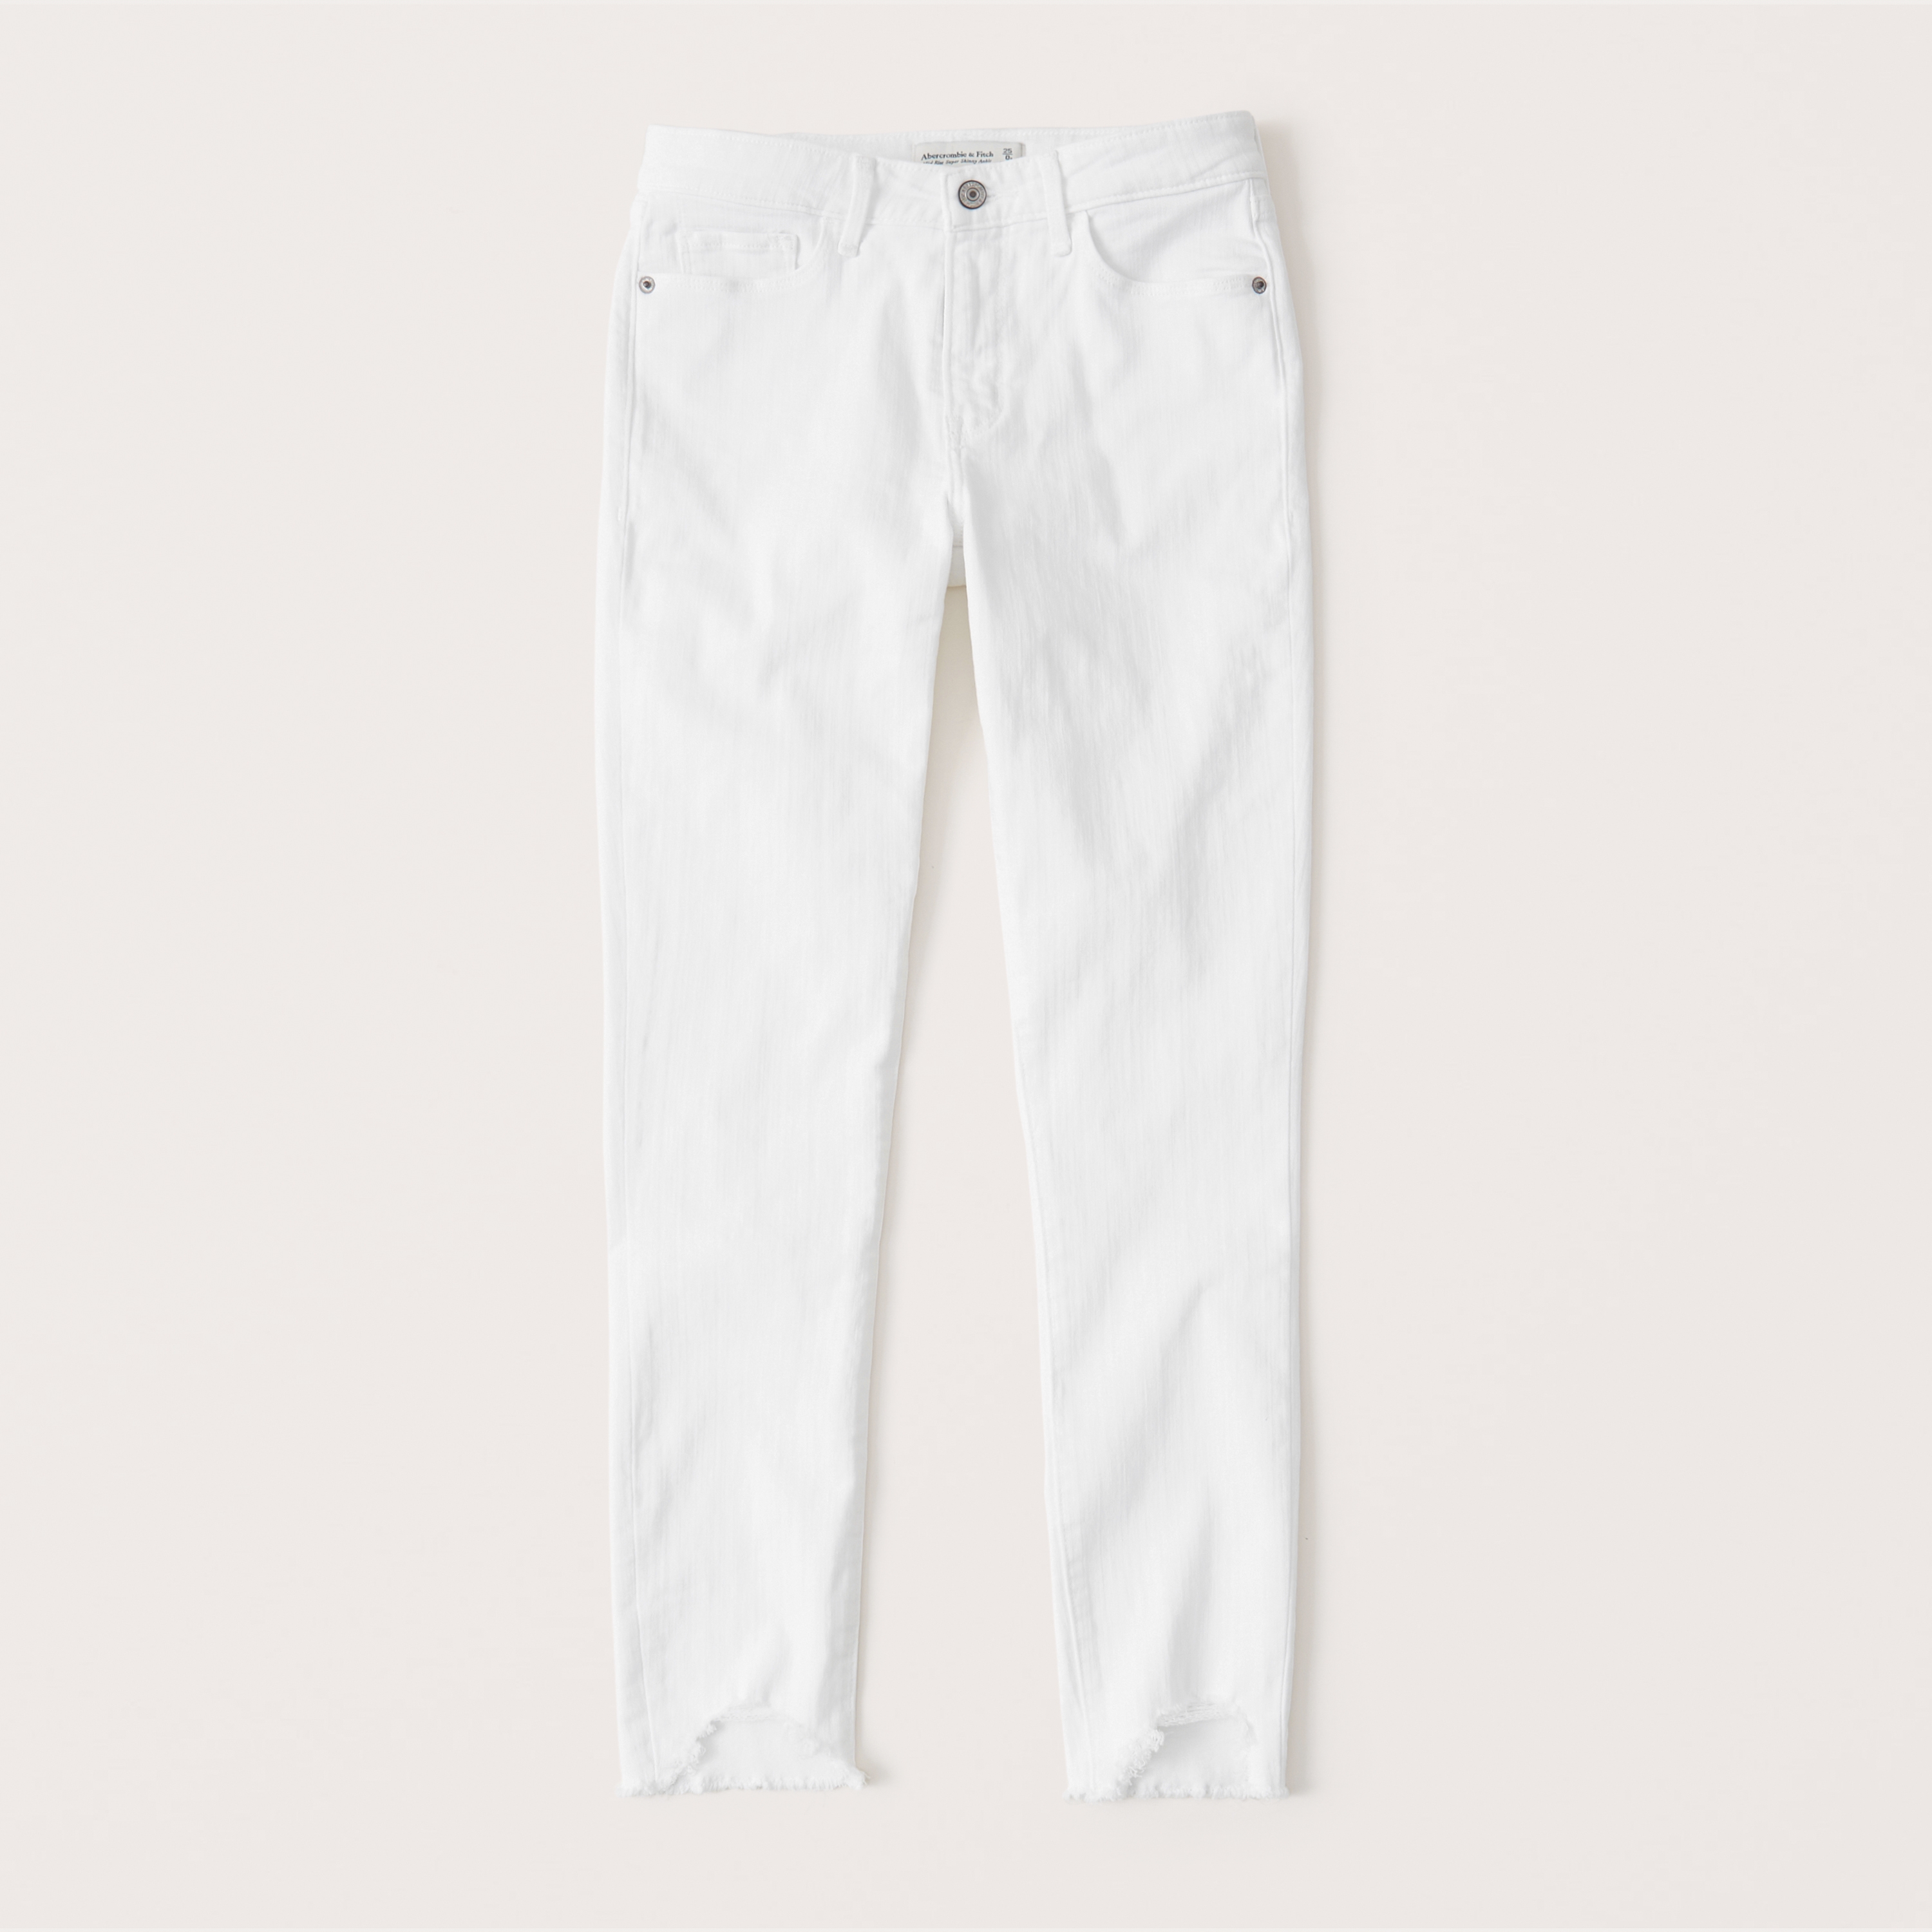 abercrombie low rise jeans